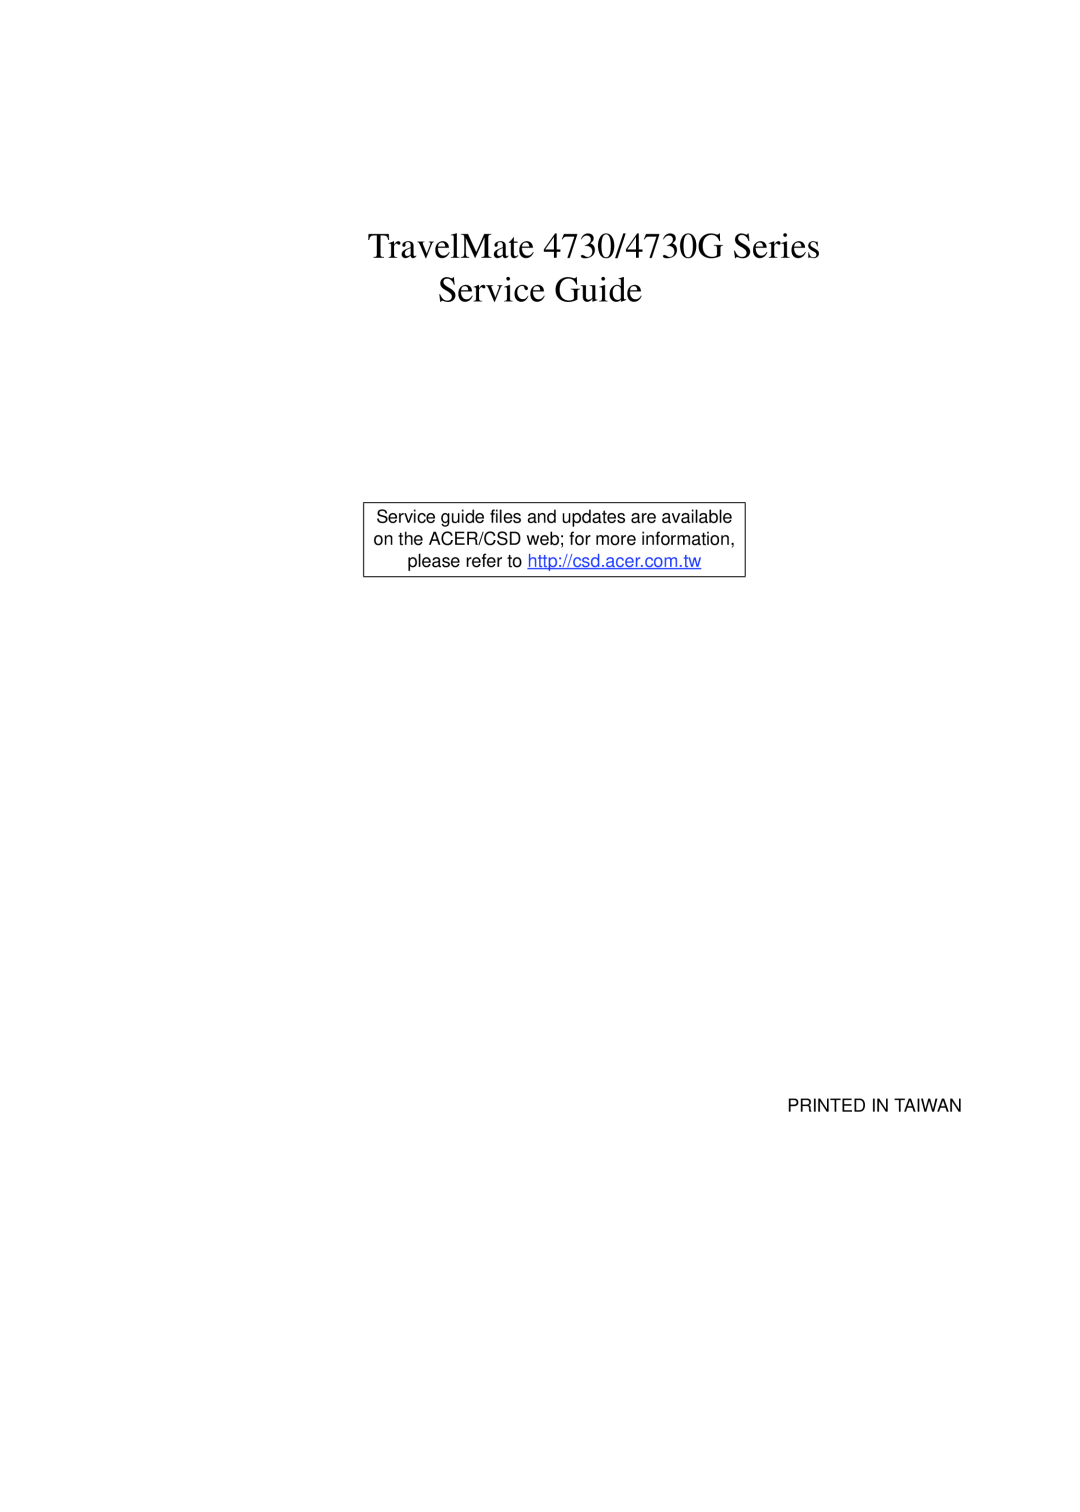 Acer manual TravelMate 4730/4730G Series Service Guide, Printed In Taiwan 